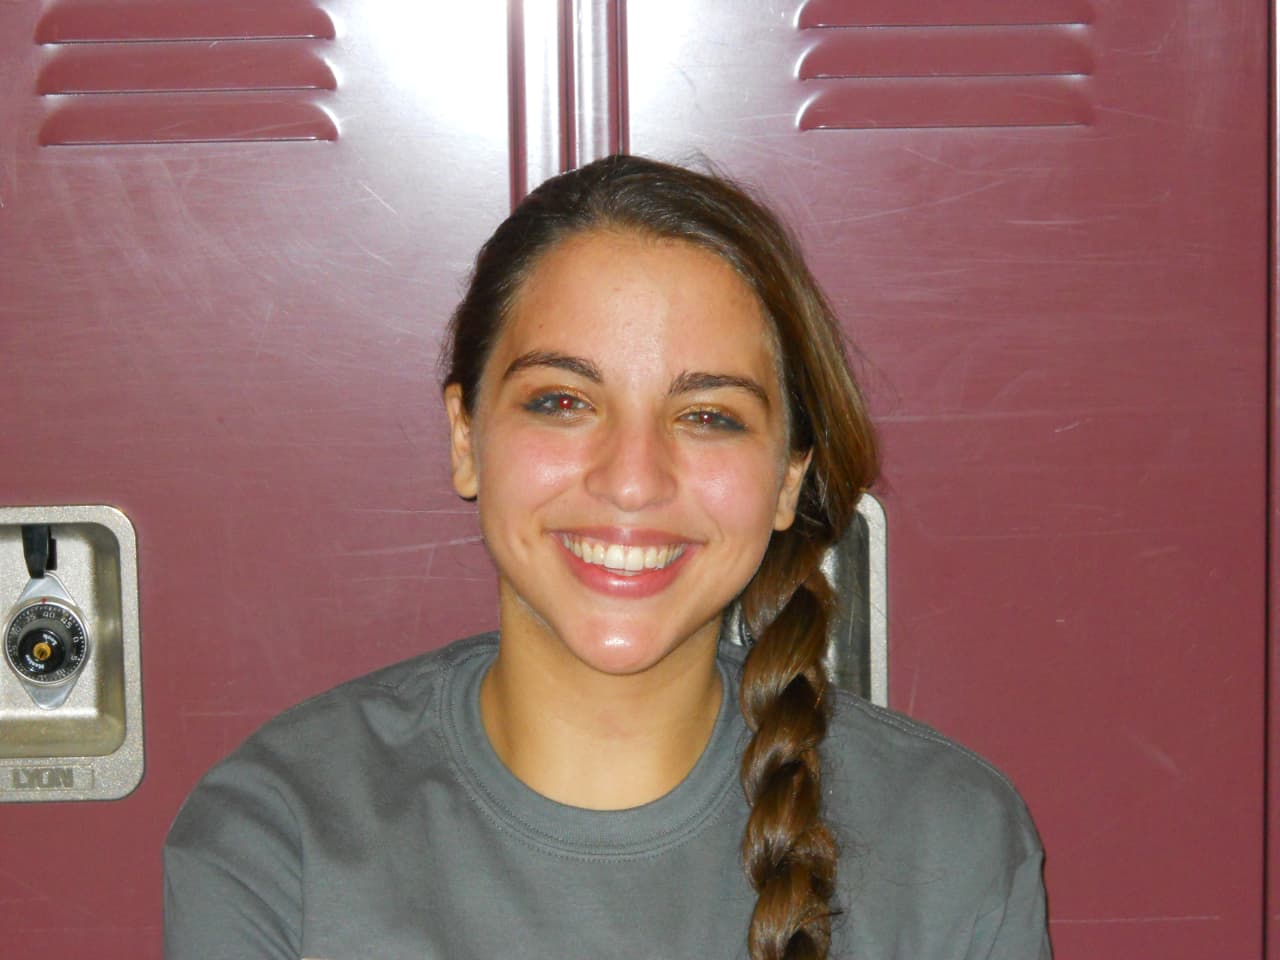 Kyle Lefkowitz had nine points and a game-high 17 rebounds in Harrison's 40-34 win over Alexander Hamilton in girls basketball Monday.